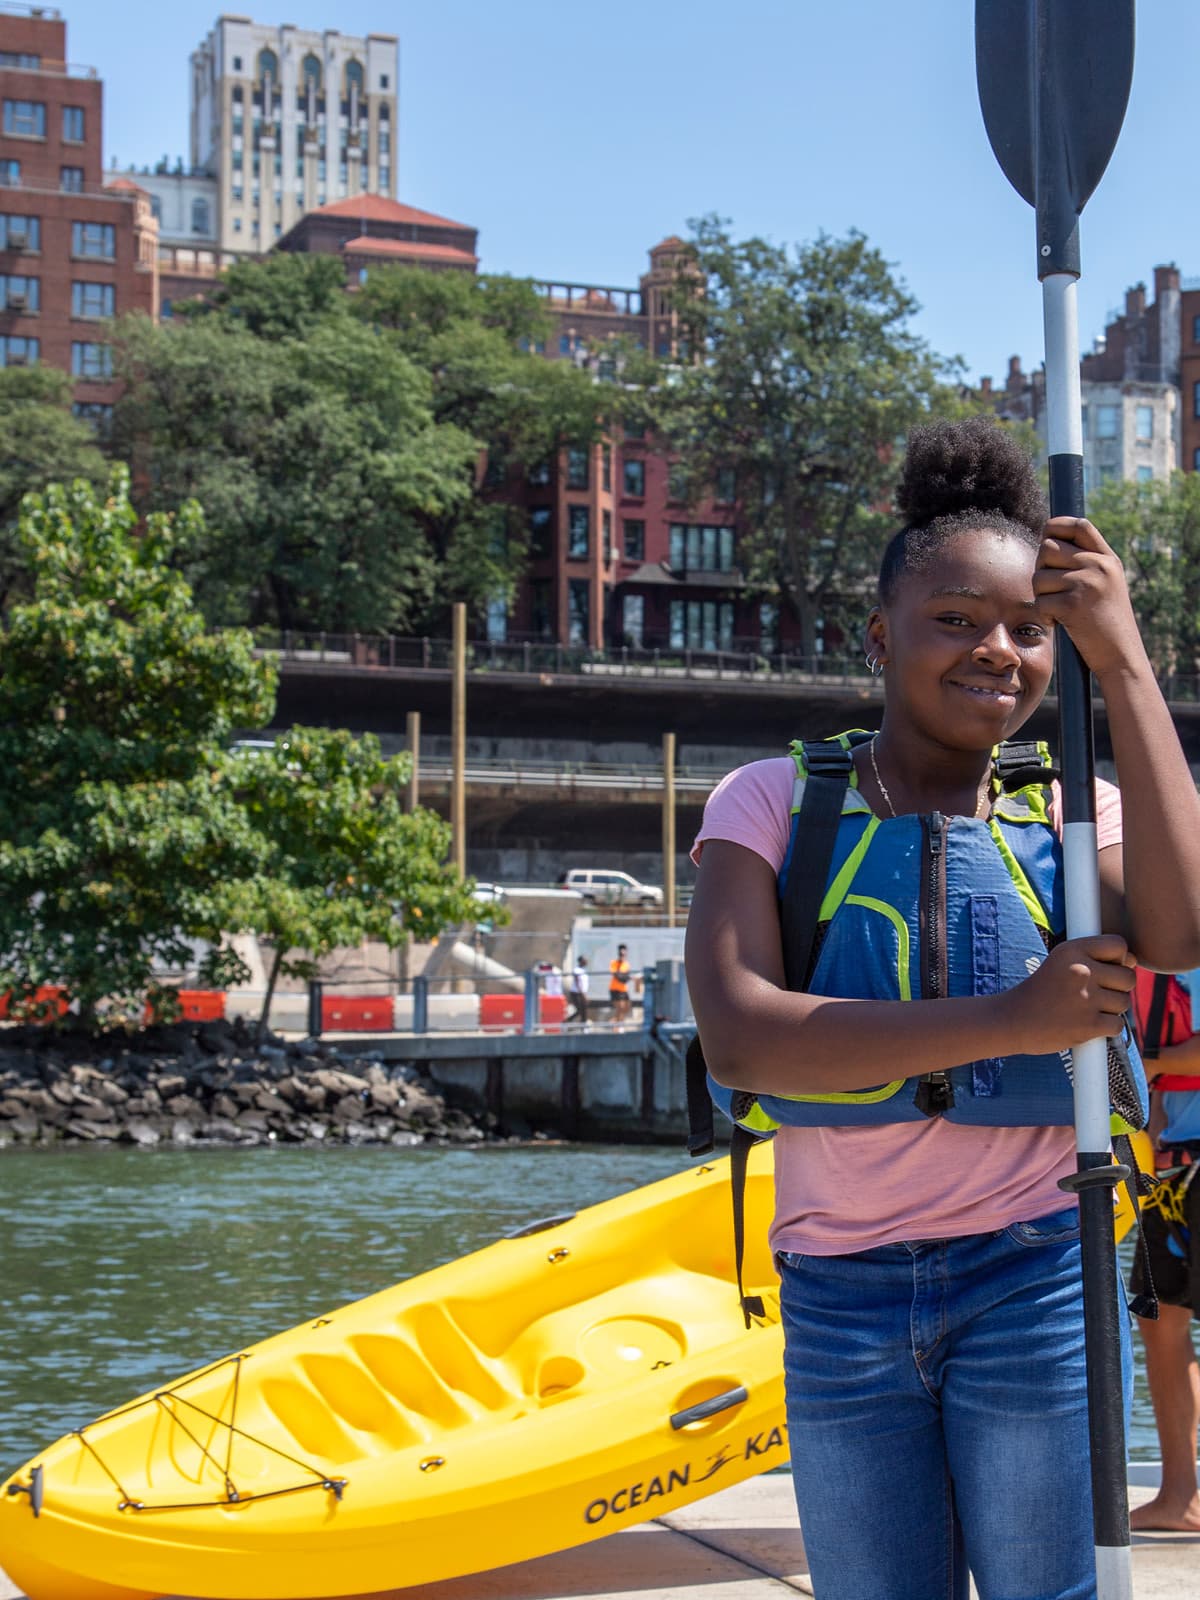 Close up of girl with kayak paddle with a kayak in the background on a sunny day. Brooklyn Heights is seen in the distance.